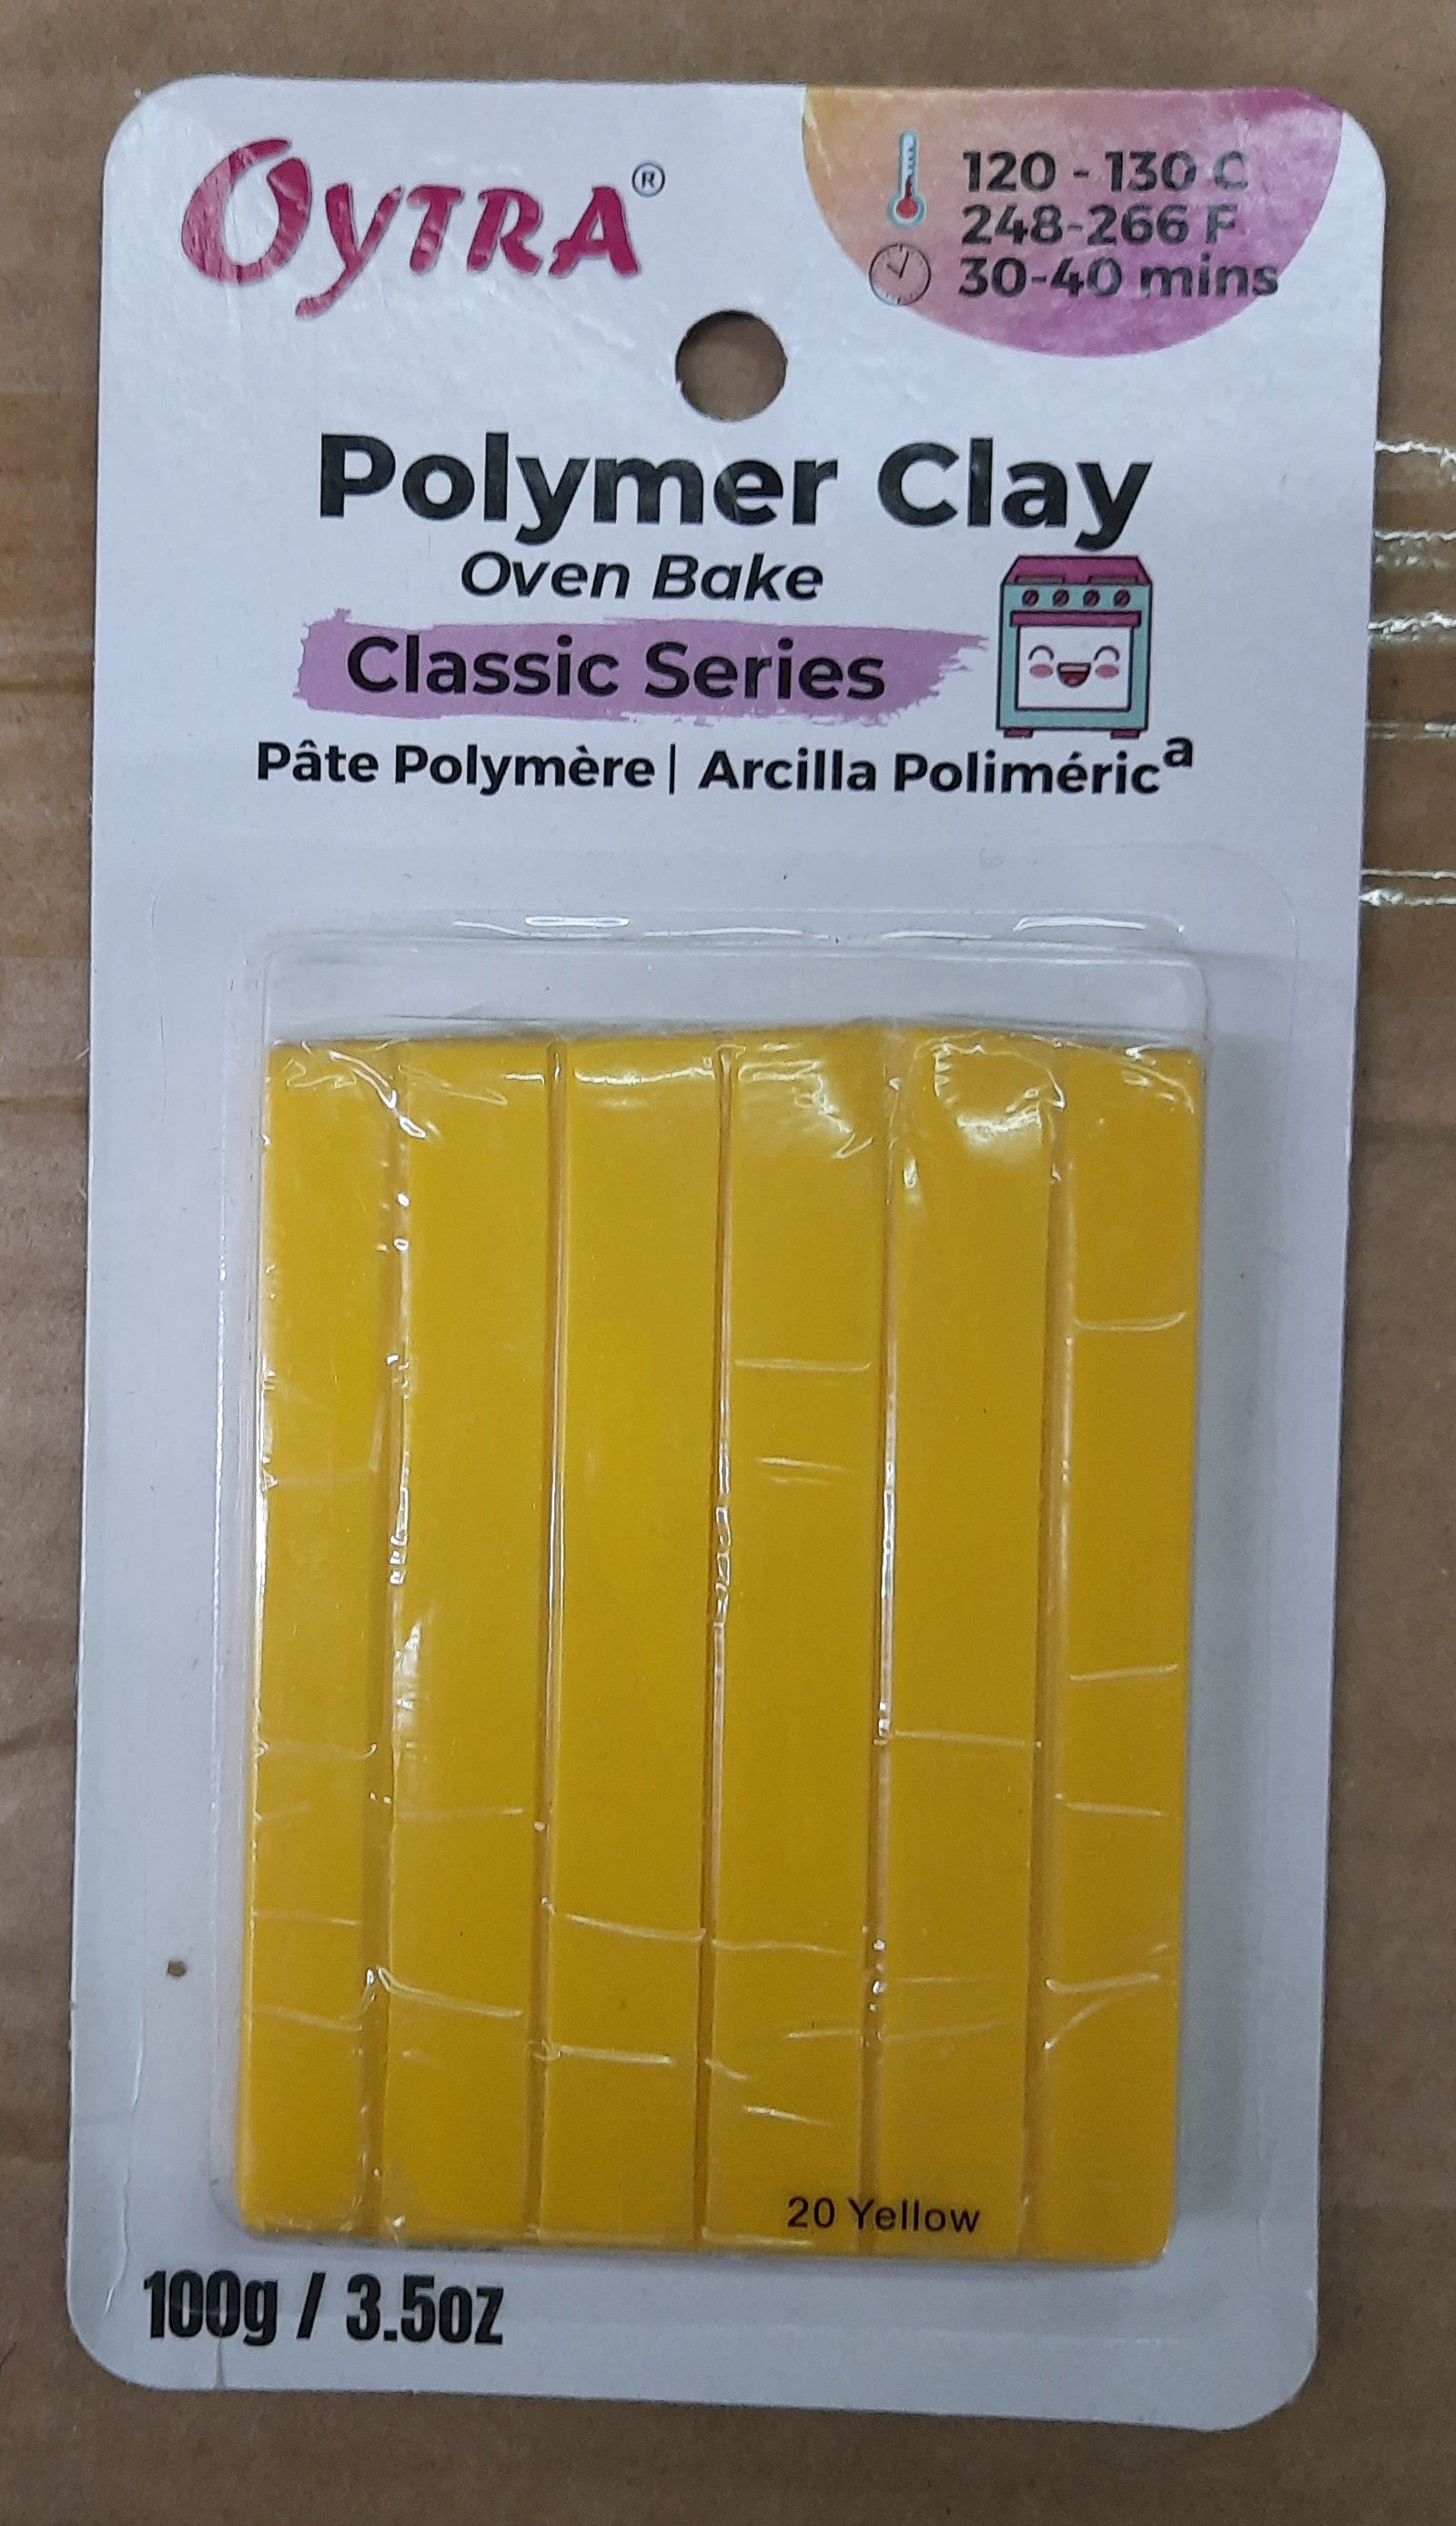 Solid Oytra Pure White Oven Bake Polymer Clay at Rs 800/piece in Mumbai